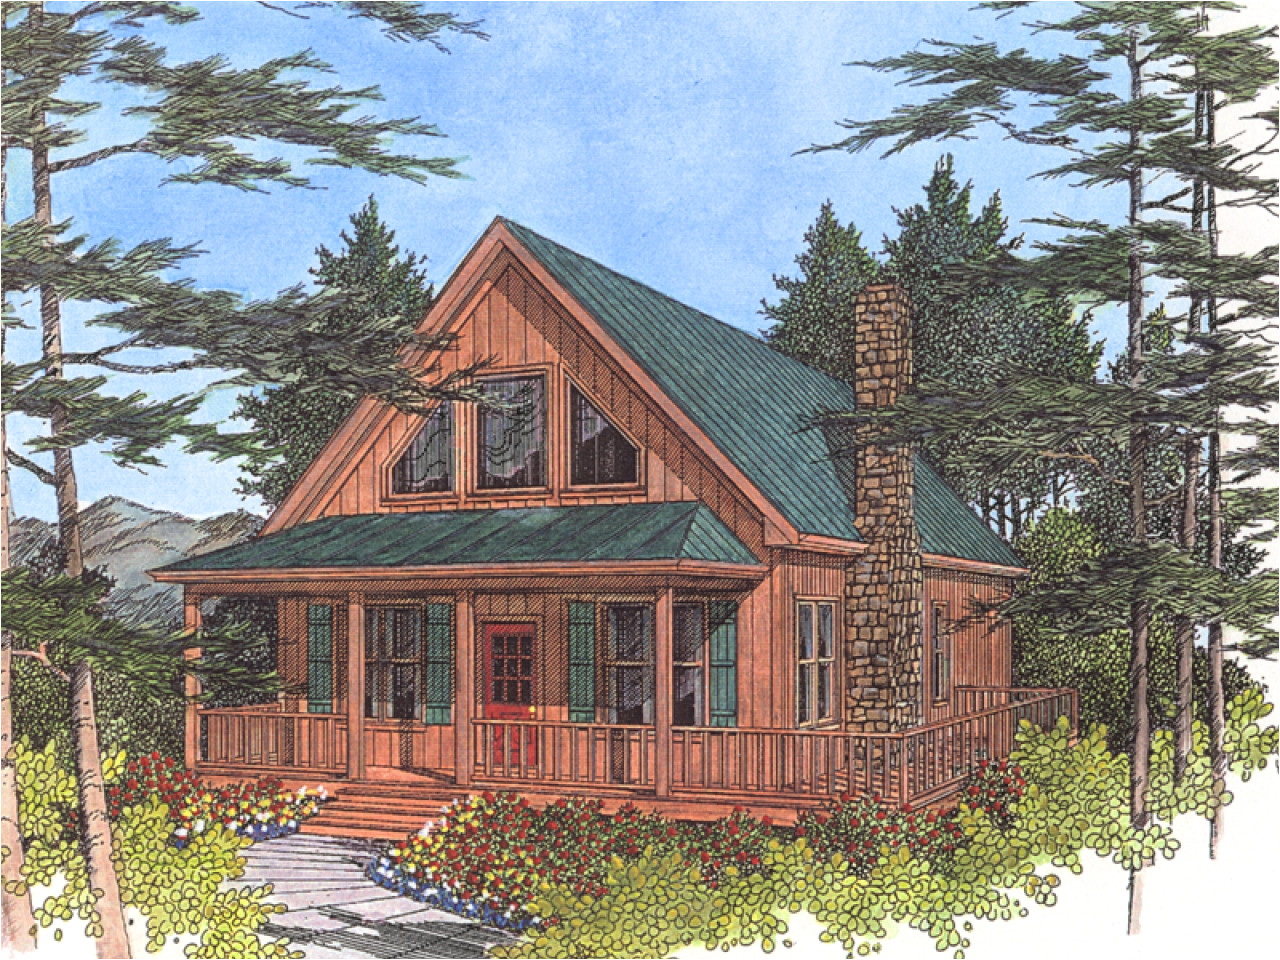 75590ea74f071d72 lake cabin cottage plans small cabin house plans